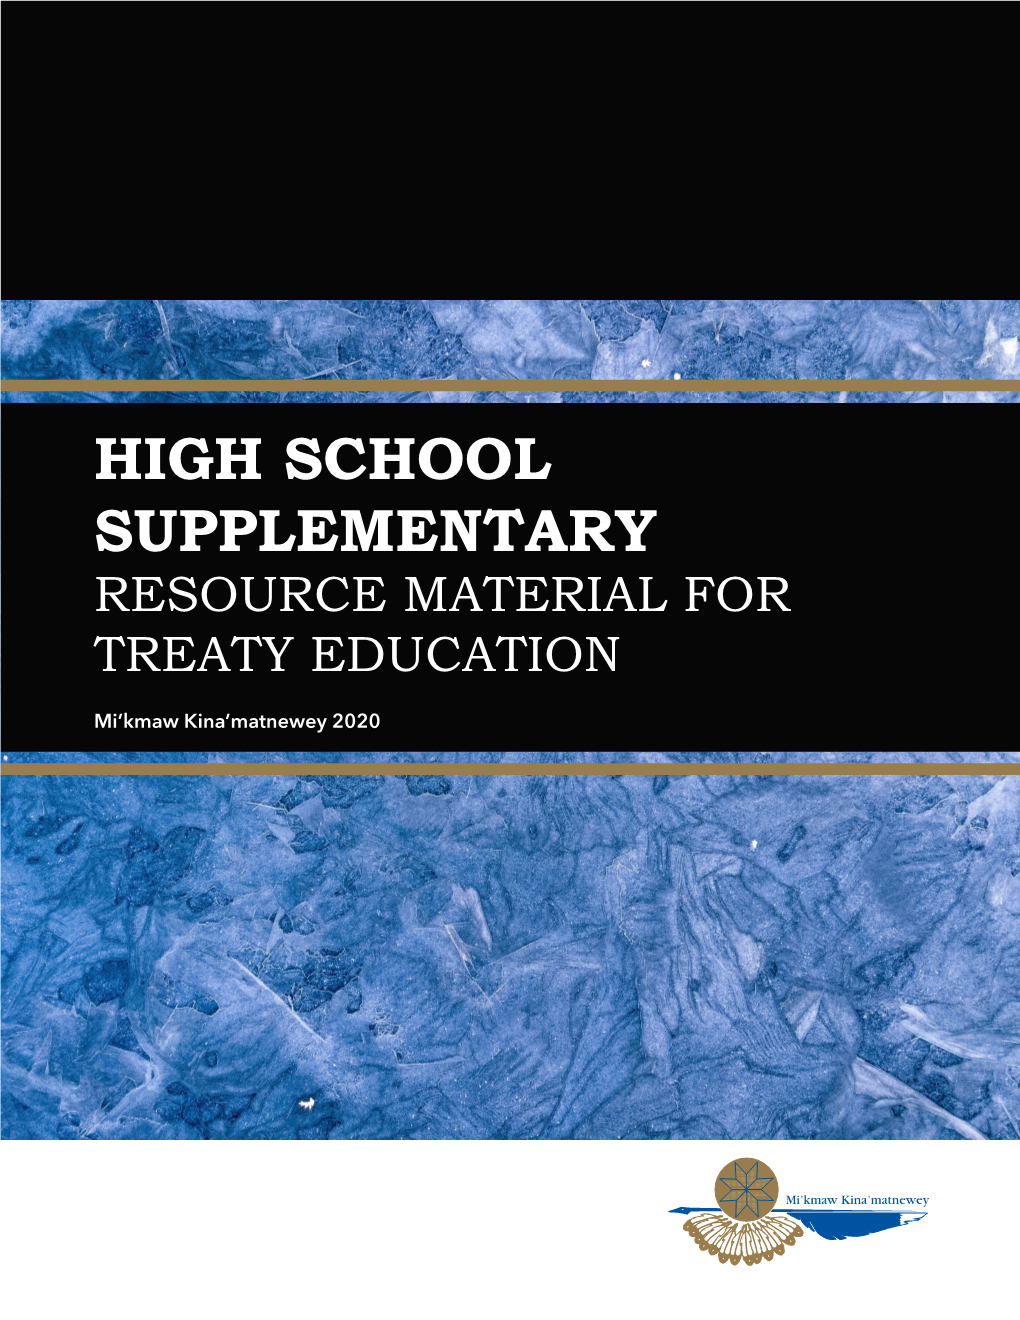 High School Supplementary Resource Material for Treaty Education